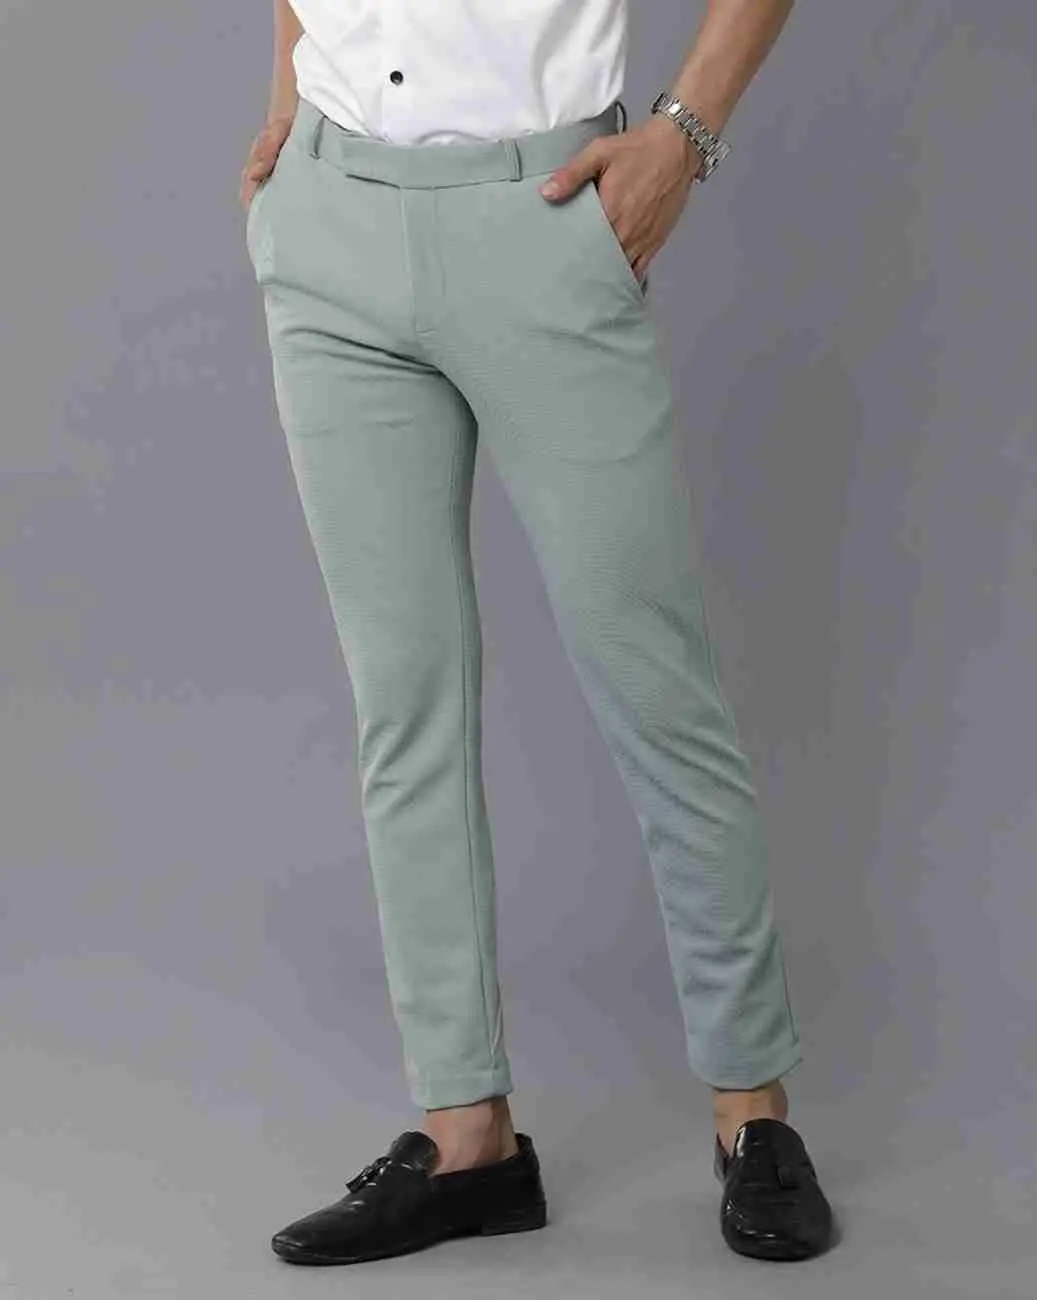 Matty Fabric Skinny Fit Formal Stretchable Pant For Men - Multicolor